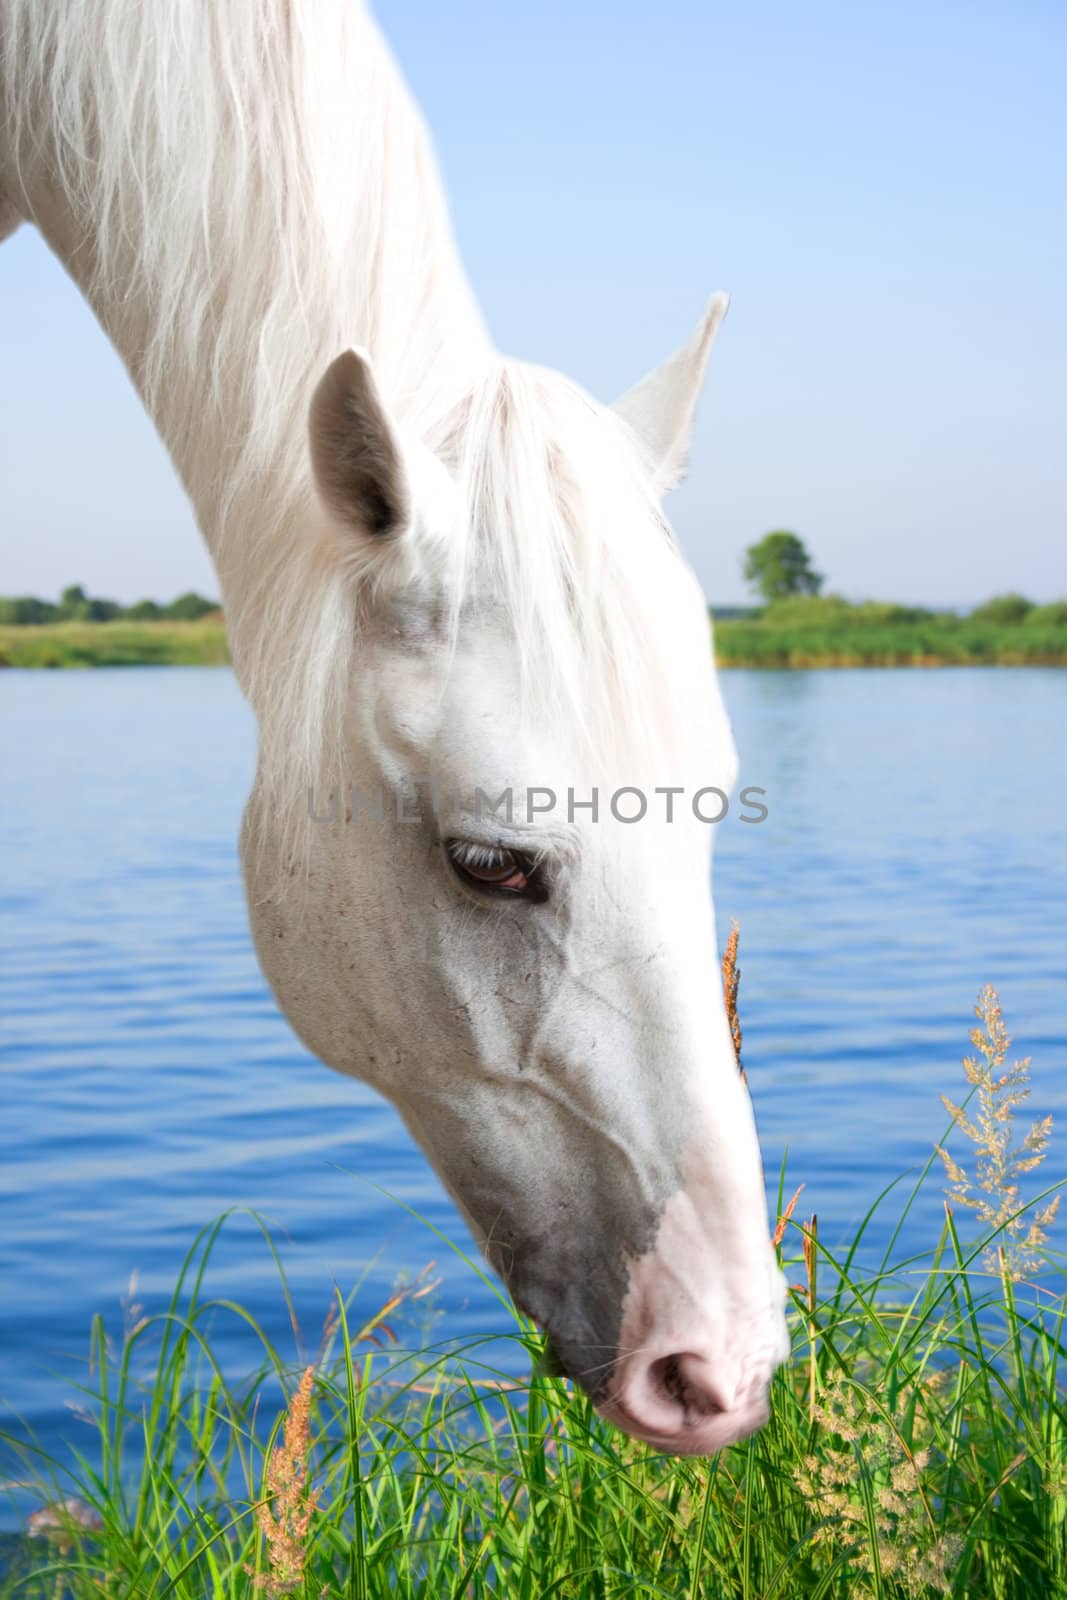 The white horse is grazed about blue lake